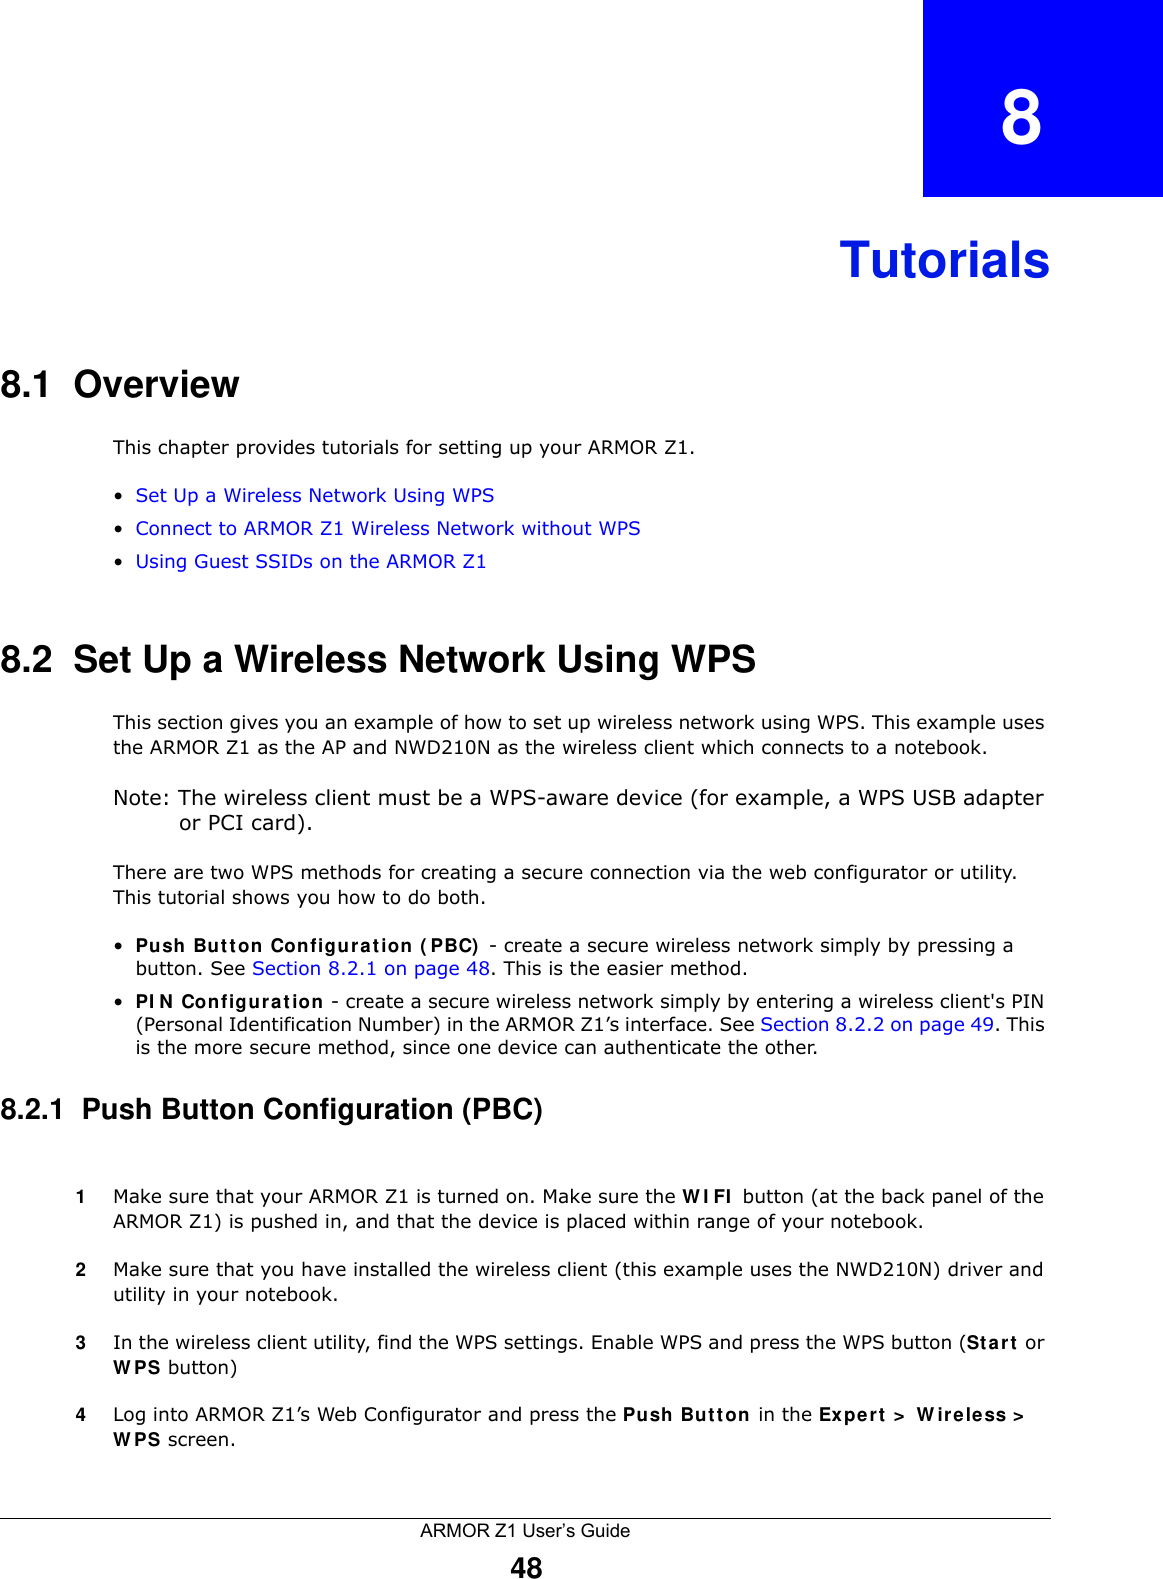 ARMOR Z1 User’s Guide48CHAPTER   8Tutorials8.1  OverviewThis chapter provides tutorials for setting up your ARMOR Z1.•Set Up a Wireless Network Using WPS•Connect to ARMOR Z1 Wireless Network without WPS•Using Guest SSIDs on the ARMOR Z18.2  Set Up a Wireless Network Using WPSThis section gives you an example of how to set up wireless network using WPS. This example uses the ARMOR Z1 as the AP and NWD210N as the wireless client which connects to a notebook. Note: The wireless client must be a WPS-aware device (for example, a WPS USB adapter or PCI card).There are two WPS methods for creating a secure connection via the web configurator or utility. This tutorial shows you how to do both.•Push Button Configuration (PBC) - create a secure wireless network simply by pressing a button. See Section 8.2.1 on page 48. This is the easier method.•PIN Configuration - create a secure wireless network simply by entering a wireless client&apos;s PIN (Personal Identification Number) in the ARMOR Z1’s interface. See Section 8.2.2 on page 49. This is the more secure method, since one device can authenticate the other.8.2.1  Push Button Configuration (PBC)1Make sure that your ARMOR Z1 is turned on. Make sure the WIFI button (at the back panel of the ARMOR Z1) is pushed in, and that the device is placed within range of your notebook. 2Make sure that you have installed the wireless client (this example uses the NWD210N) driver and utility in your notebook.3In the wireless client utility, find the WPS settings. Enable WPS and press the WPS button (Start or WPS button)4Log into ARMOR Z1’s Web Configurator and press the Push Button in the Expert &gt; Wireless &gt;  WPS screen. 